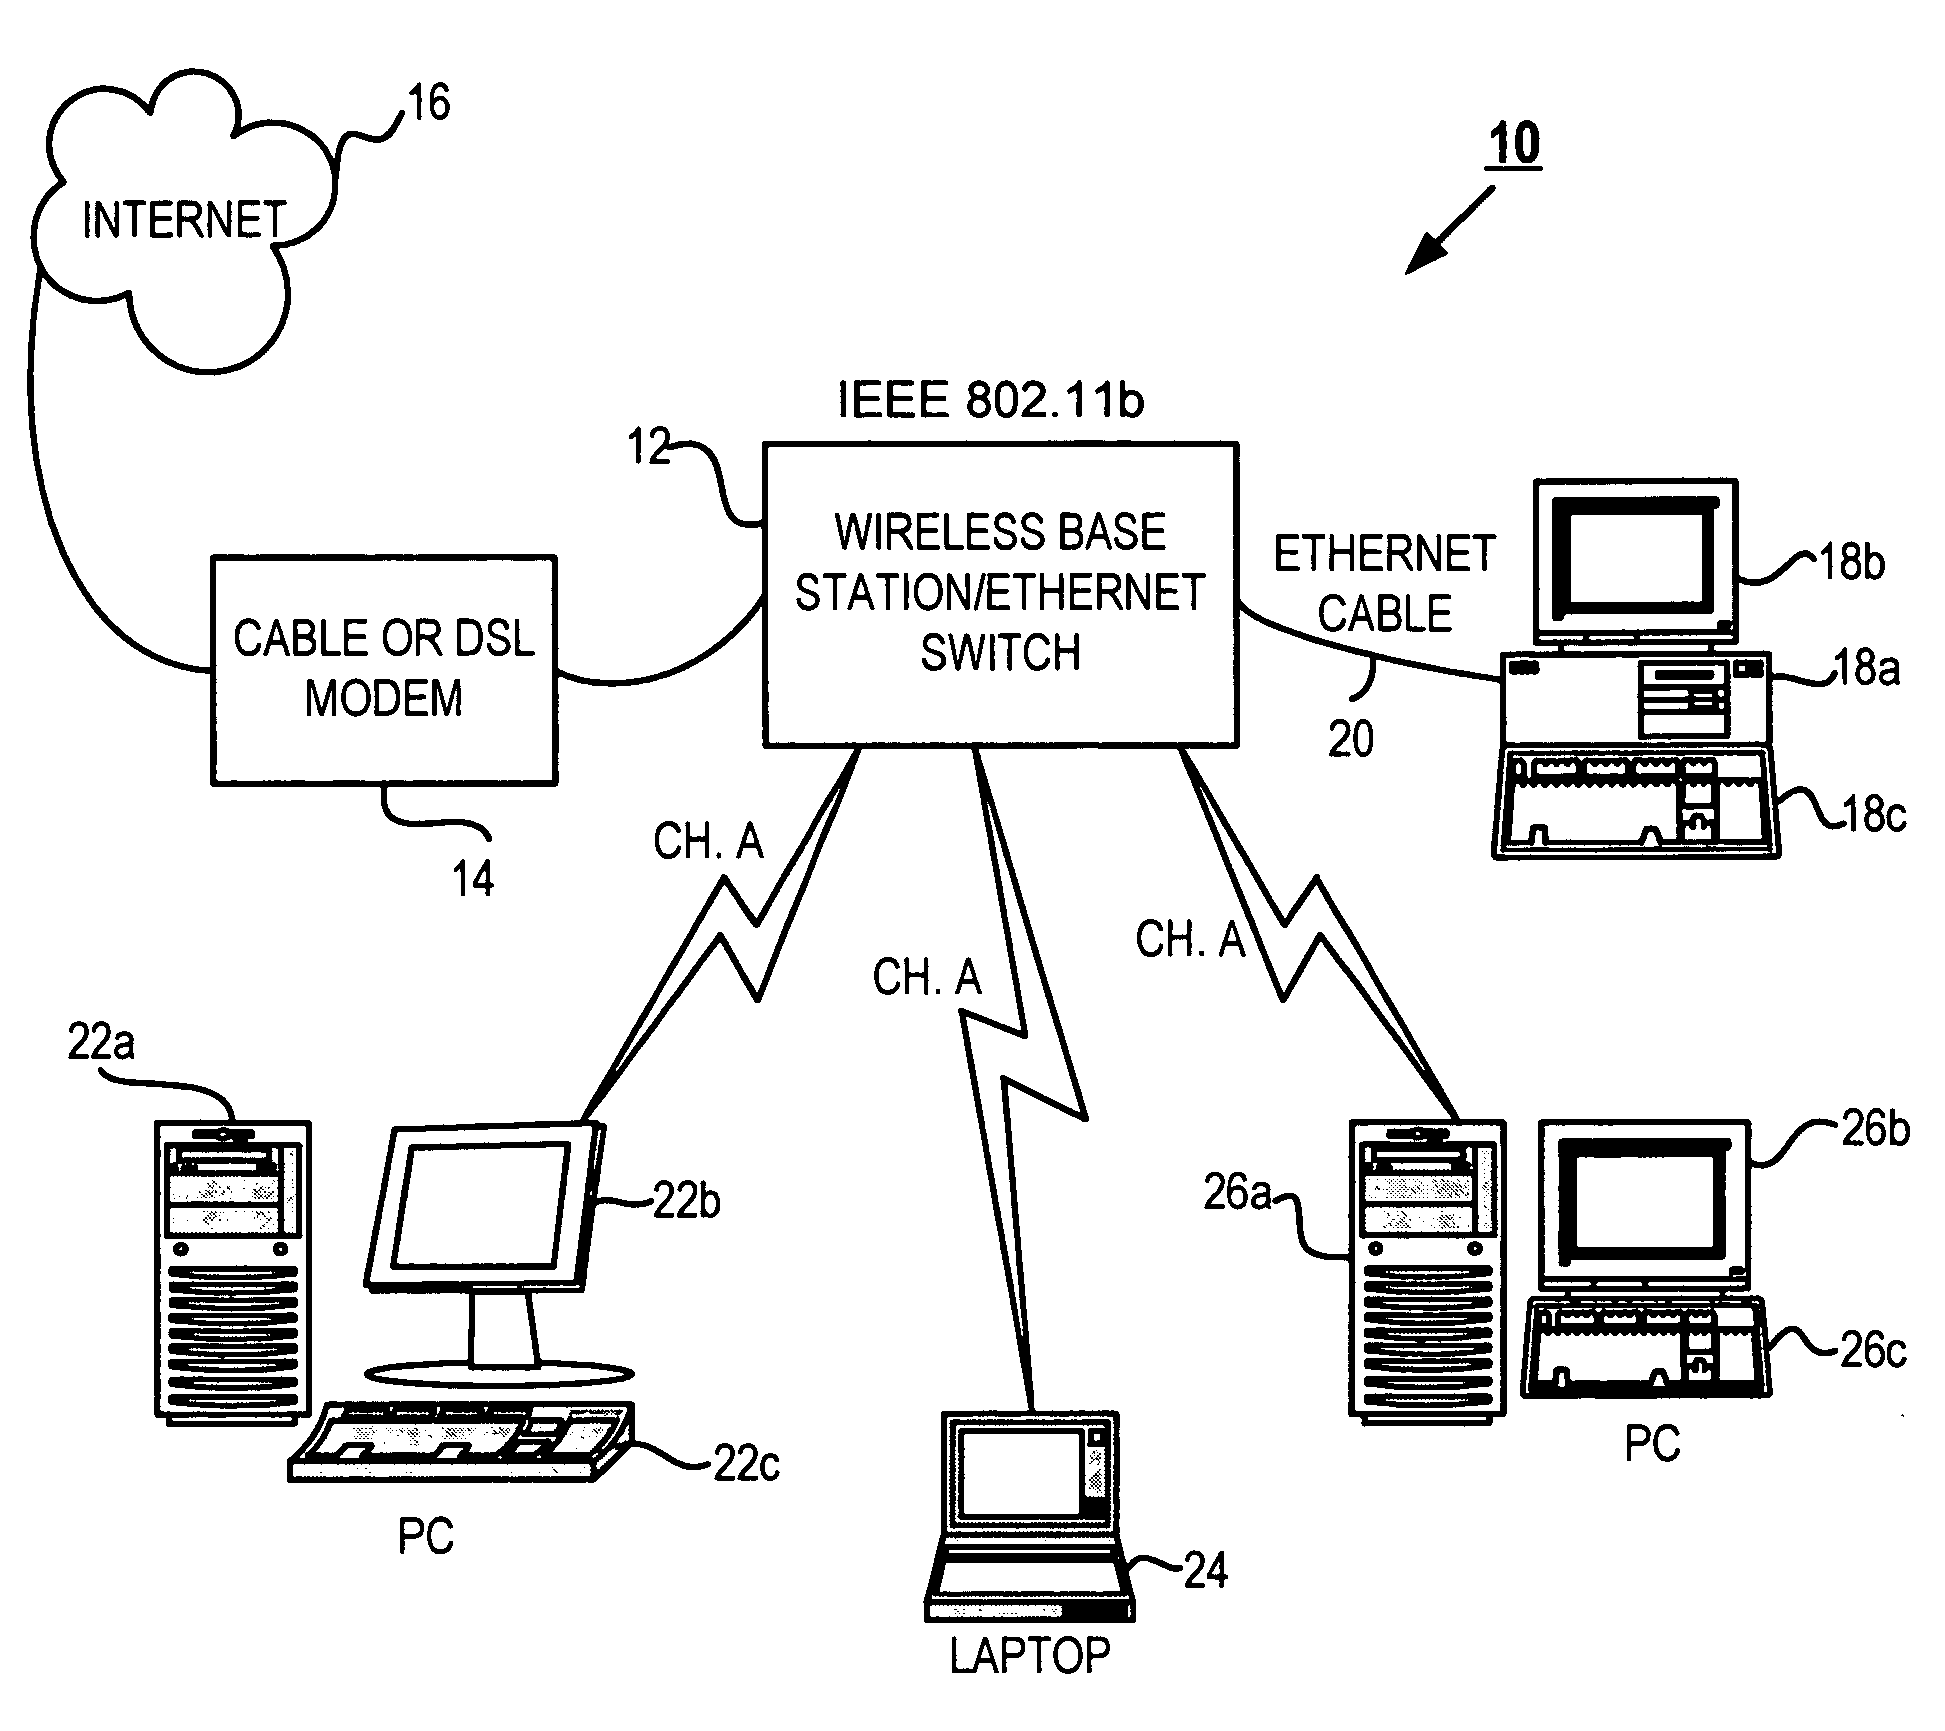 Method and system for securing and monitoring a wireless network